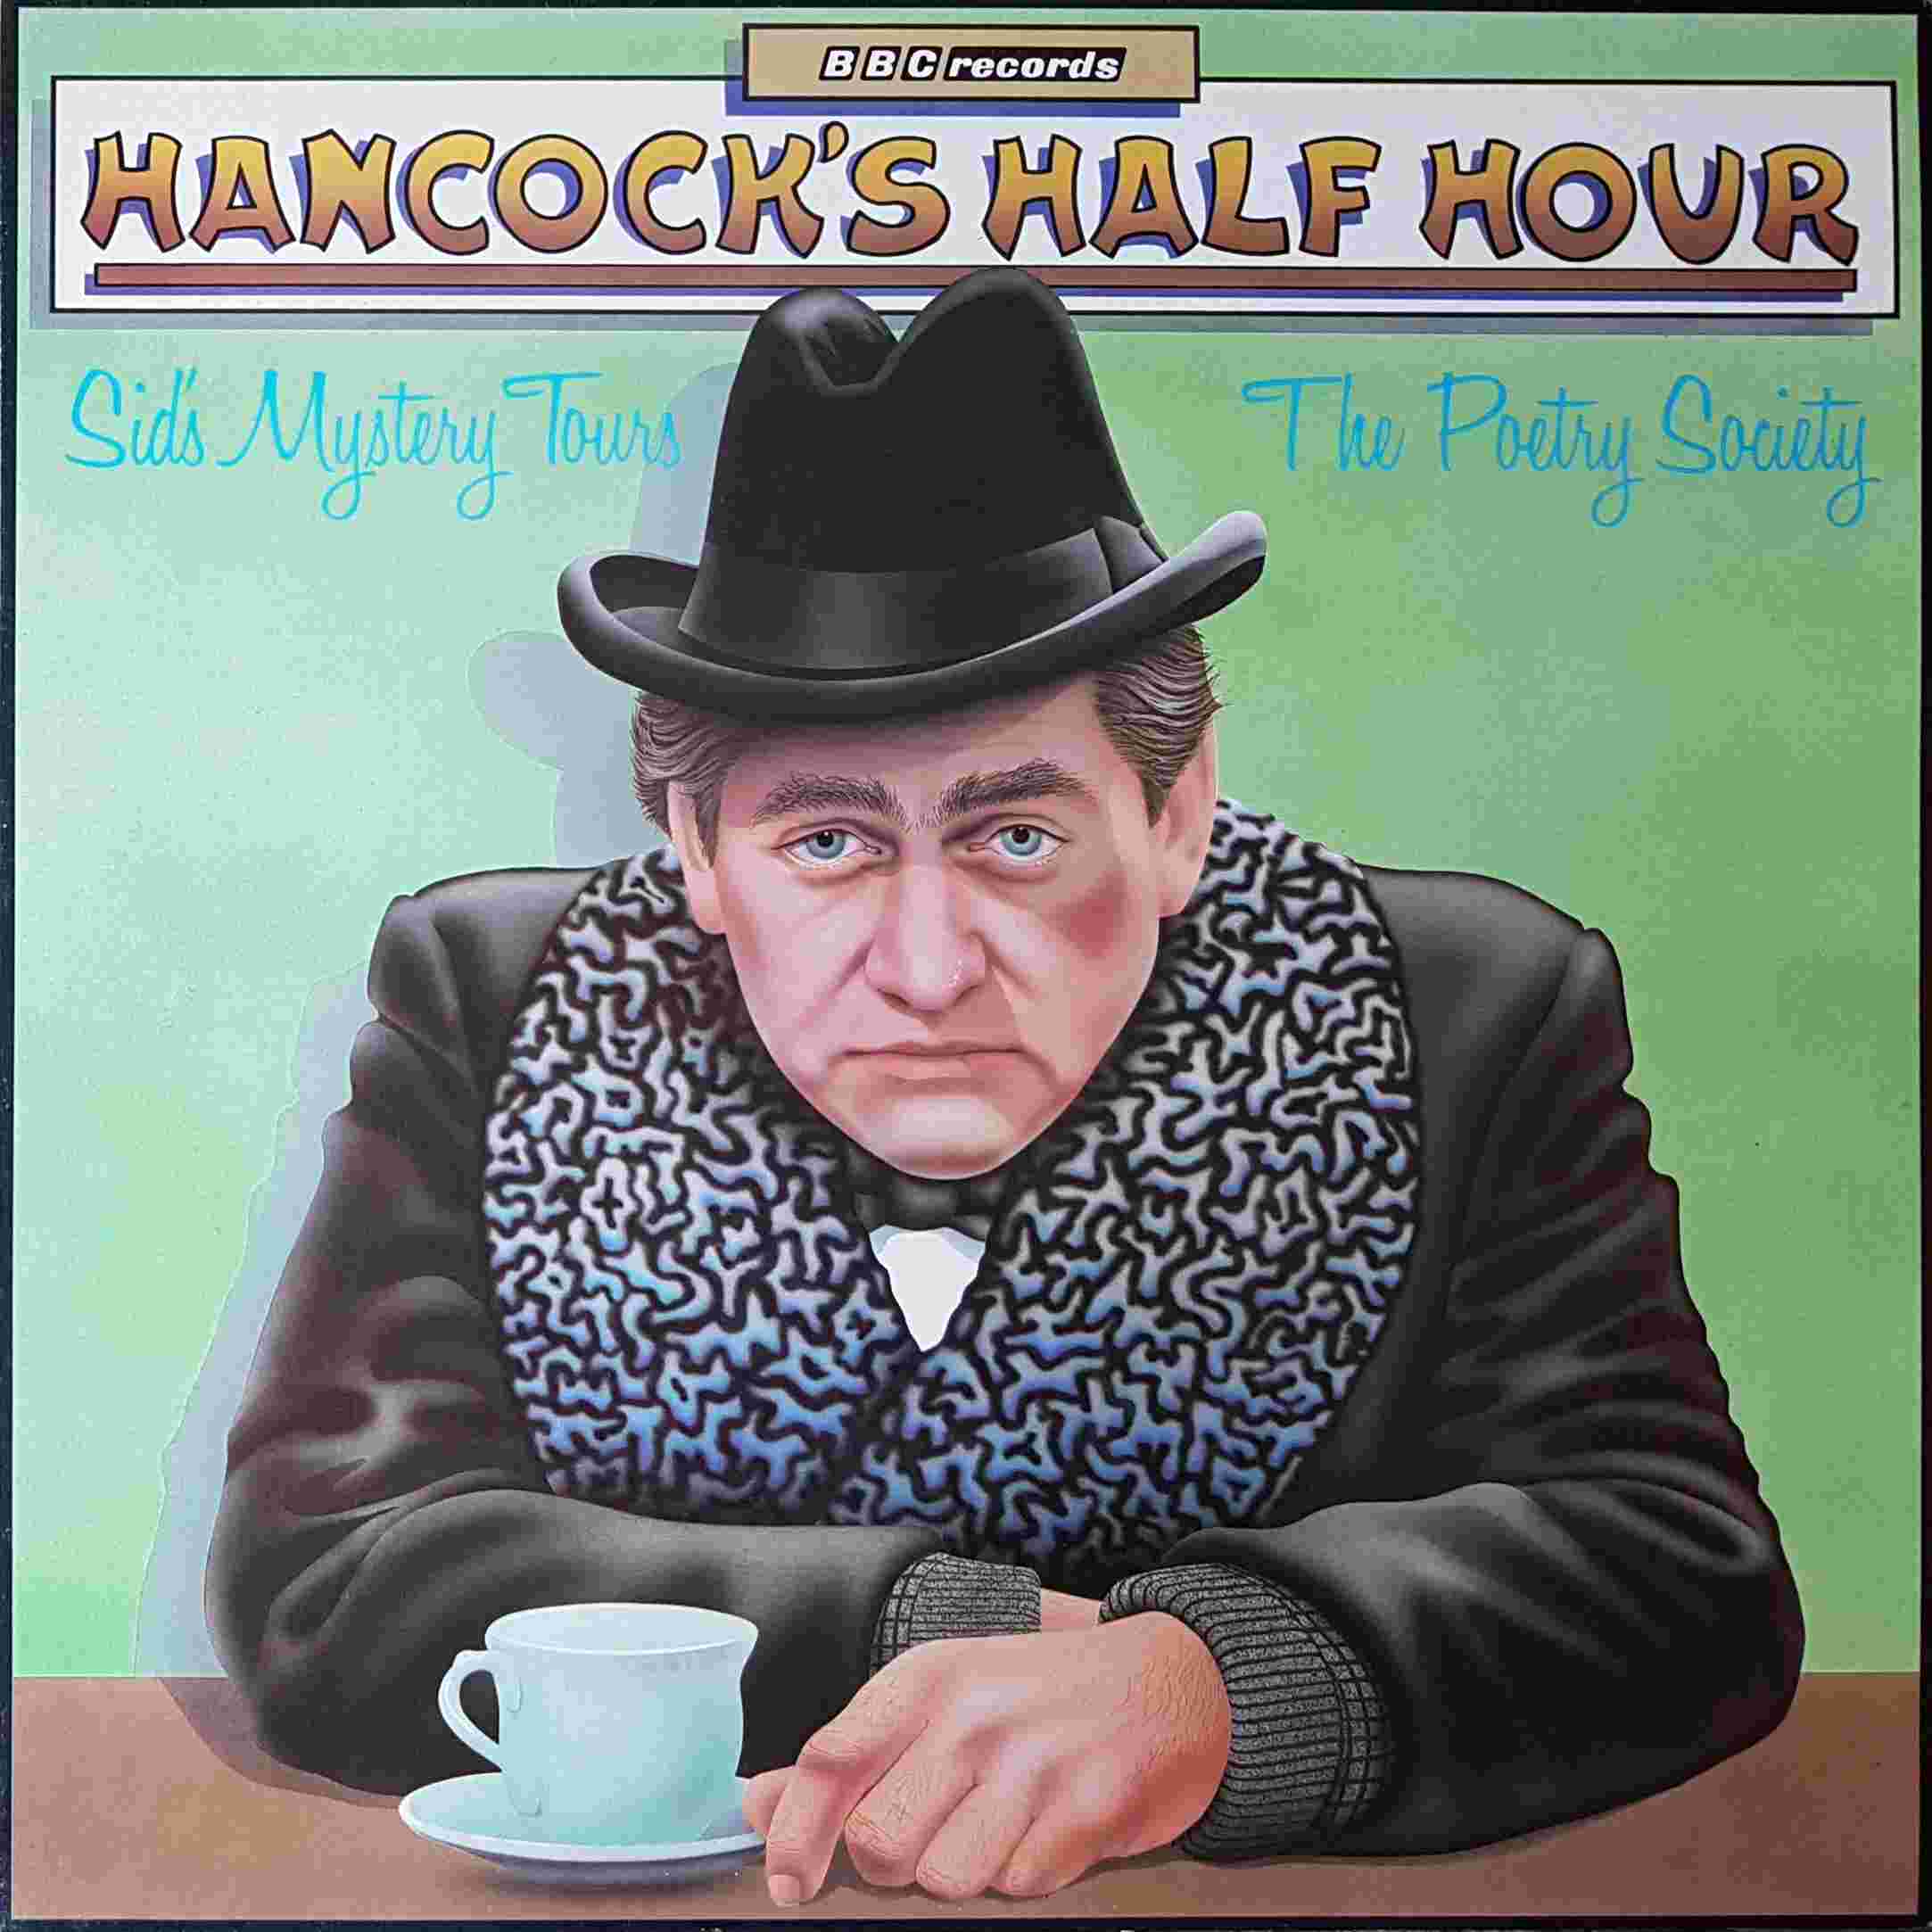 Picture of REB 394 Hancock's half hour - Volume 1 by artist Tony Hancock from the BBC albums - Records and Tapes library